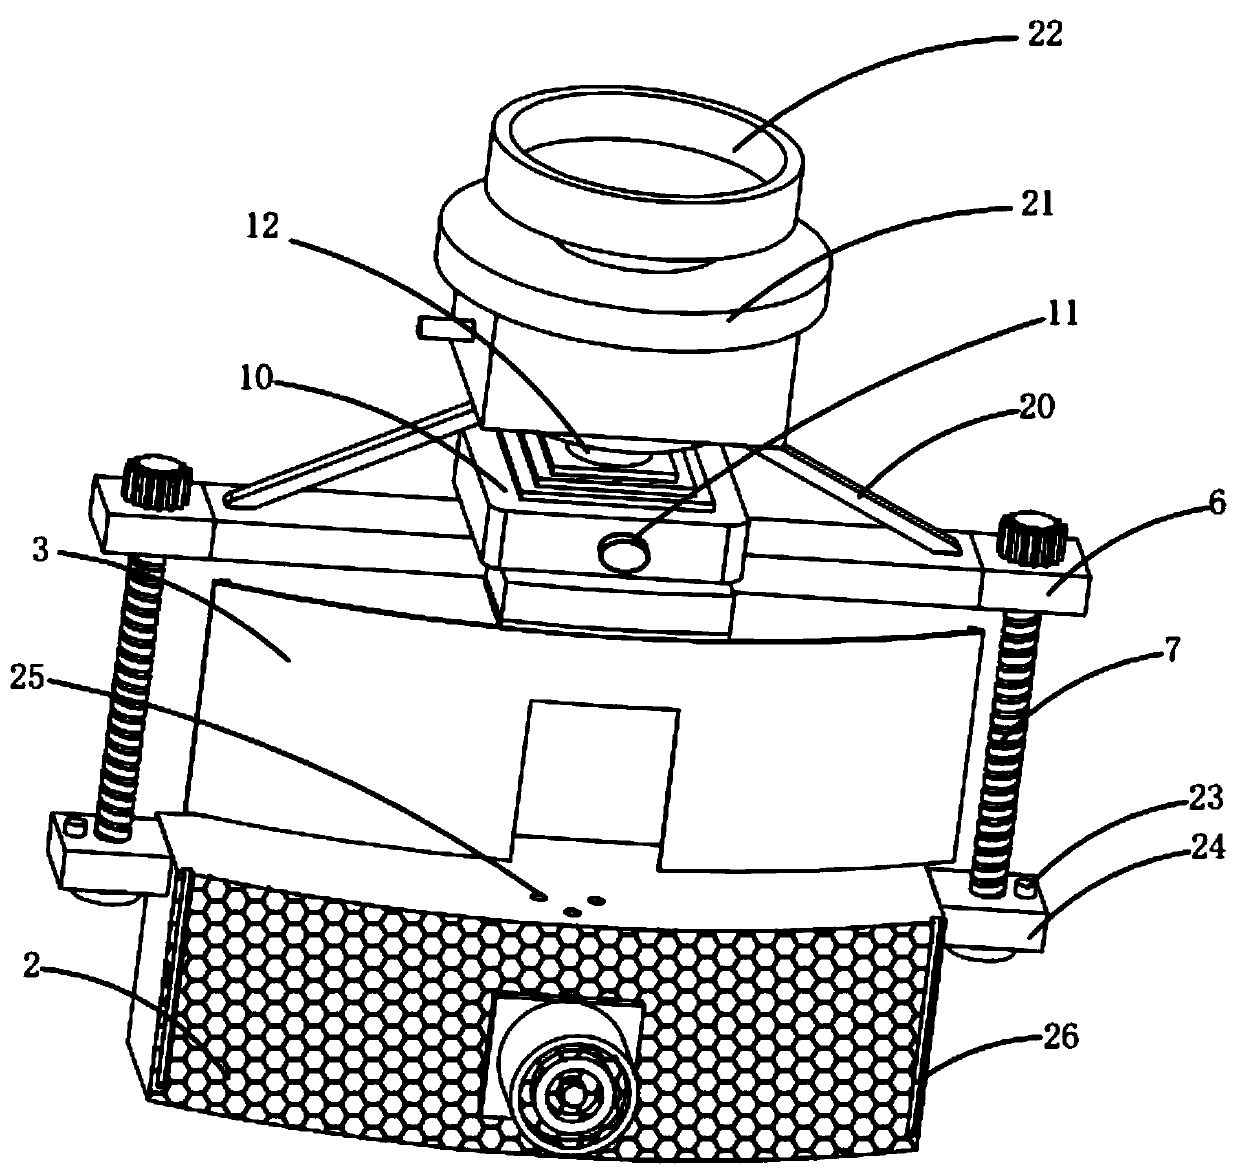 An automobile safety device with a recording function